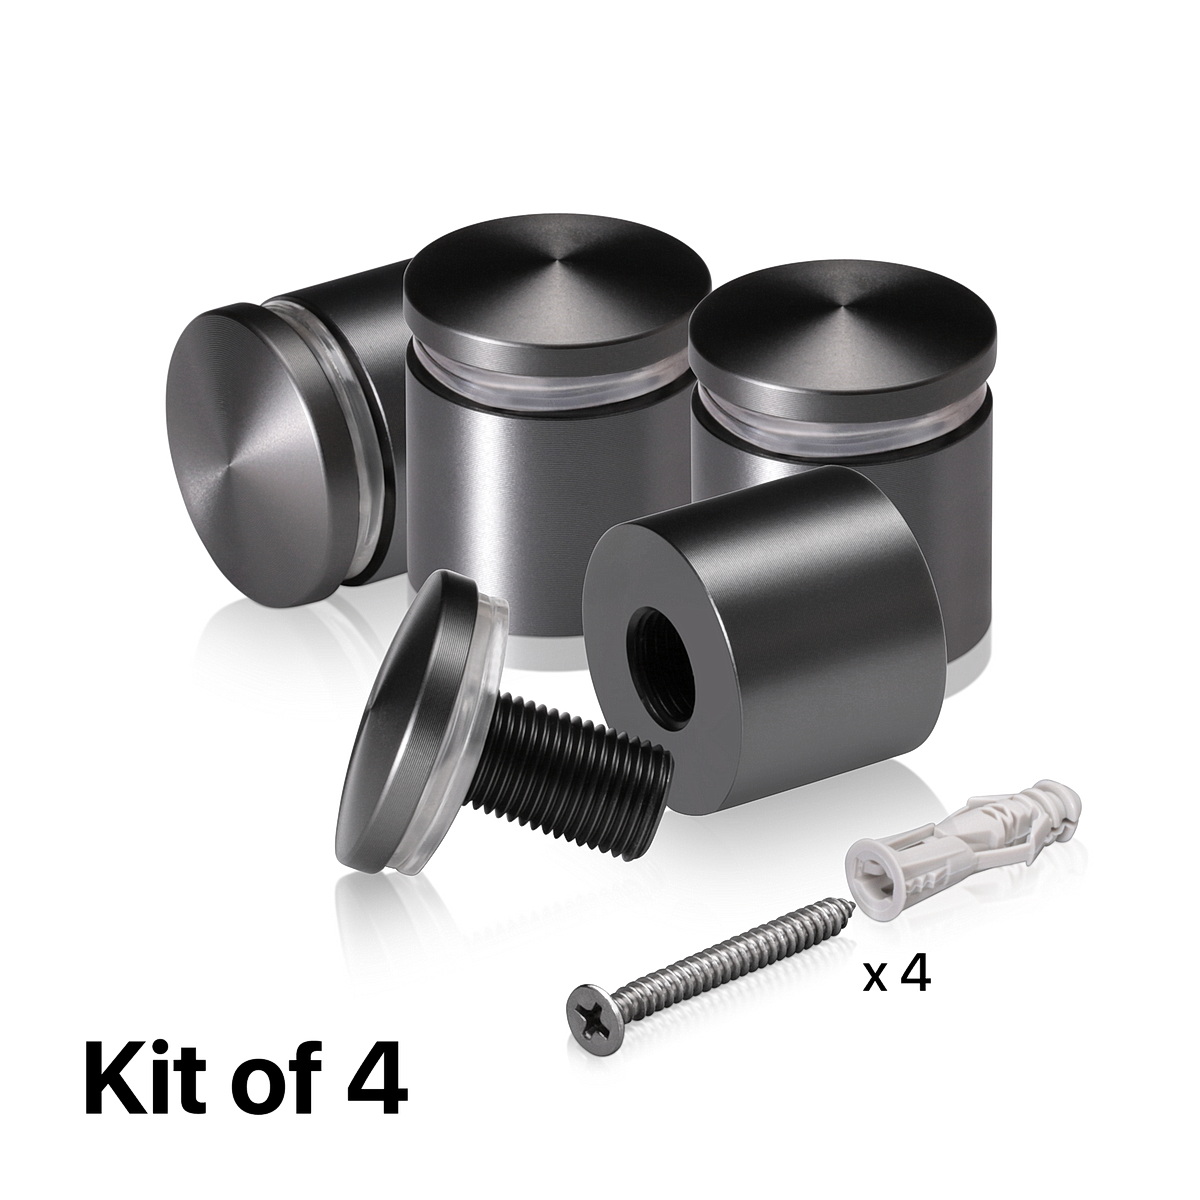 (Set of 4) 1'' Diameter X 3/4'' Barrel Length, Aluminum Rounded Head Standoffs, Titanium Anodized Finish Standoff with (4) 2216Z Screws and (4) LANC1 Anchors for concrete or drywall (For Inside / Outside use) [Required Material Hole Size: 7/16'']